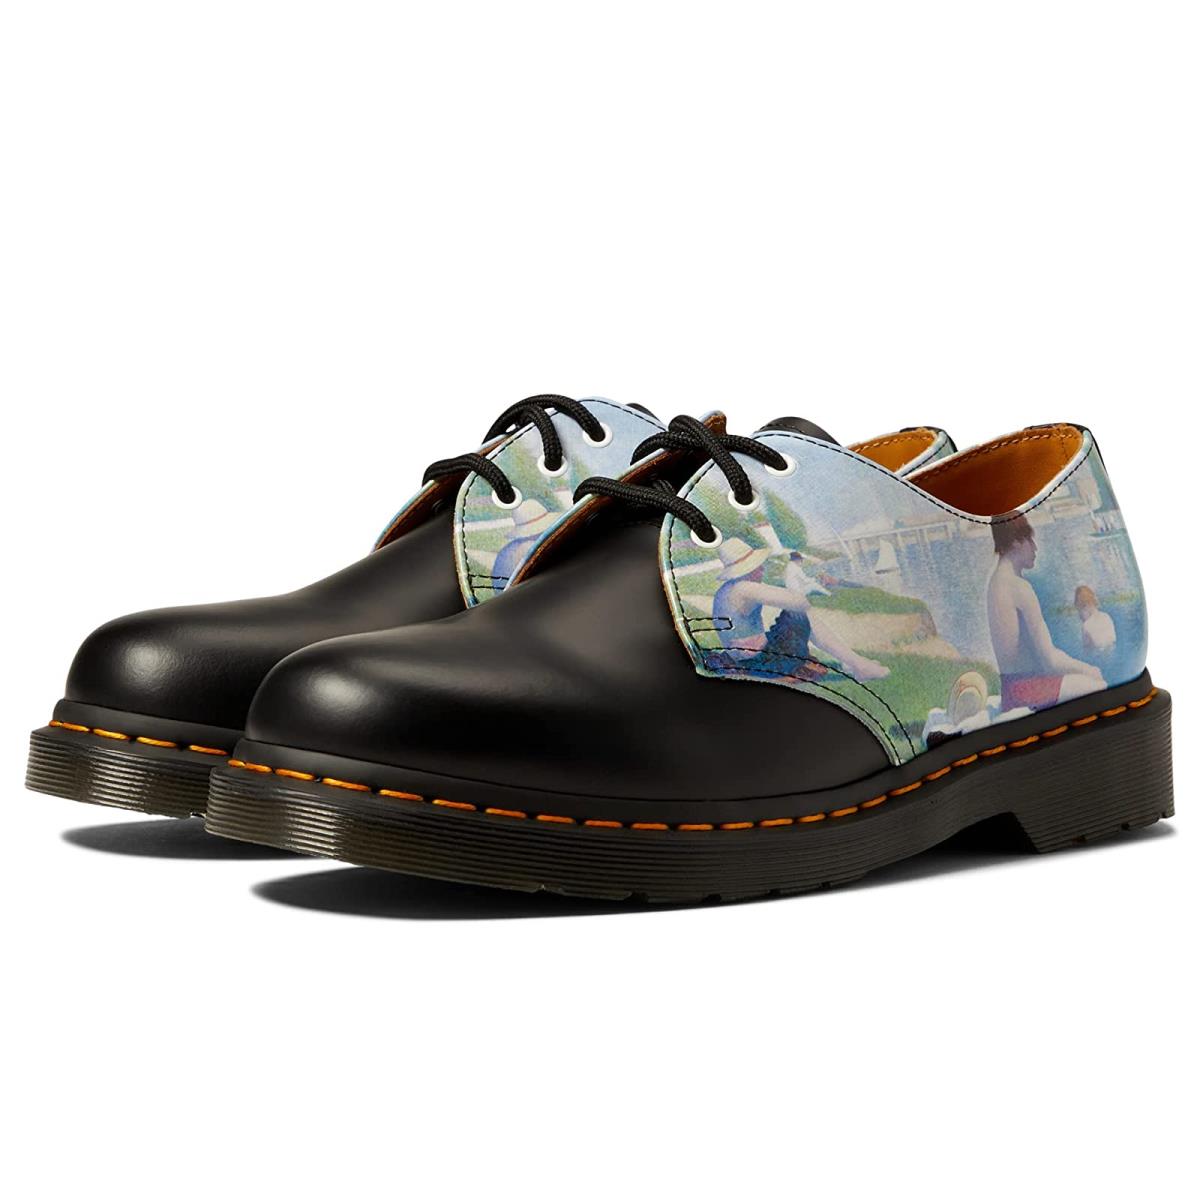 Unisex Oxfords Dr. Martens 1461 The National Gallery Oxford Shoe (Seurat) Bathers